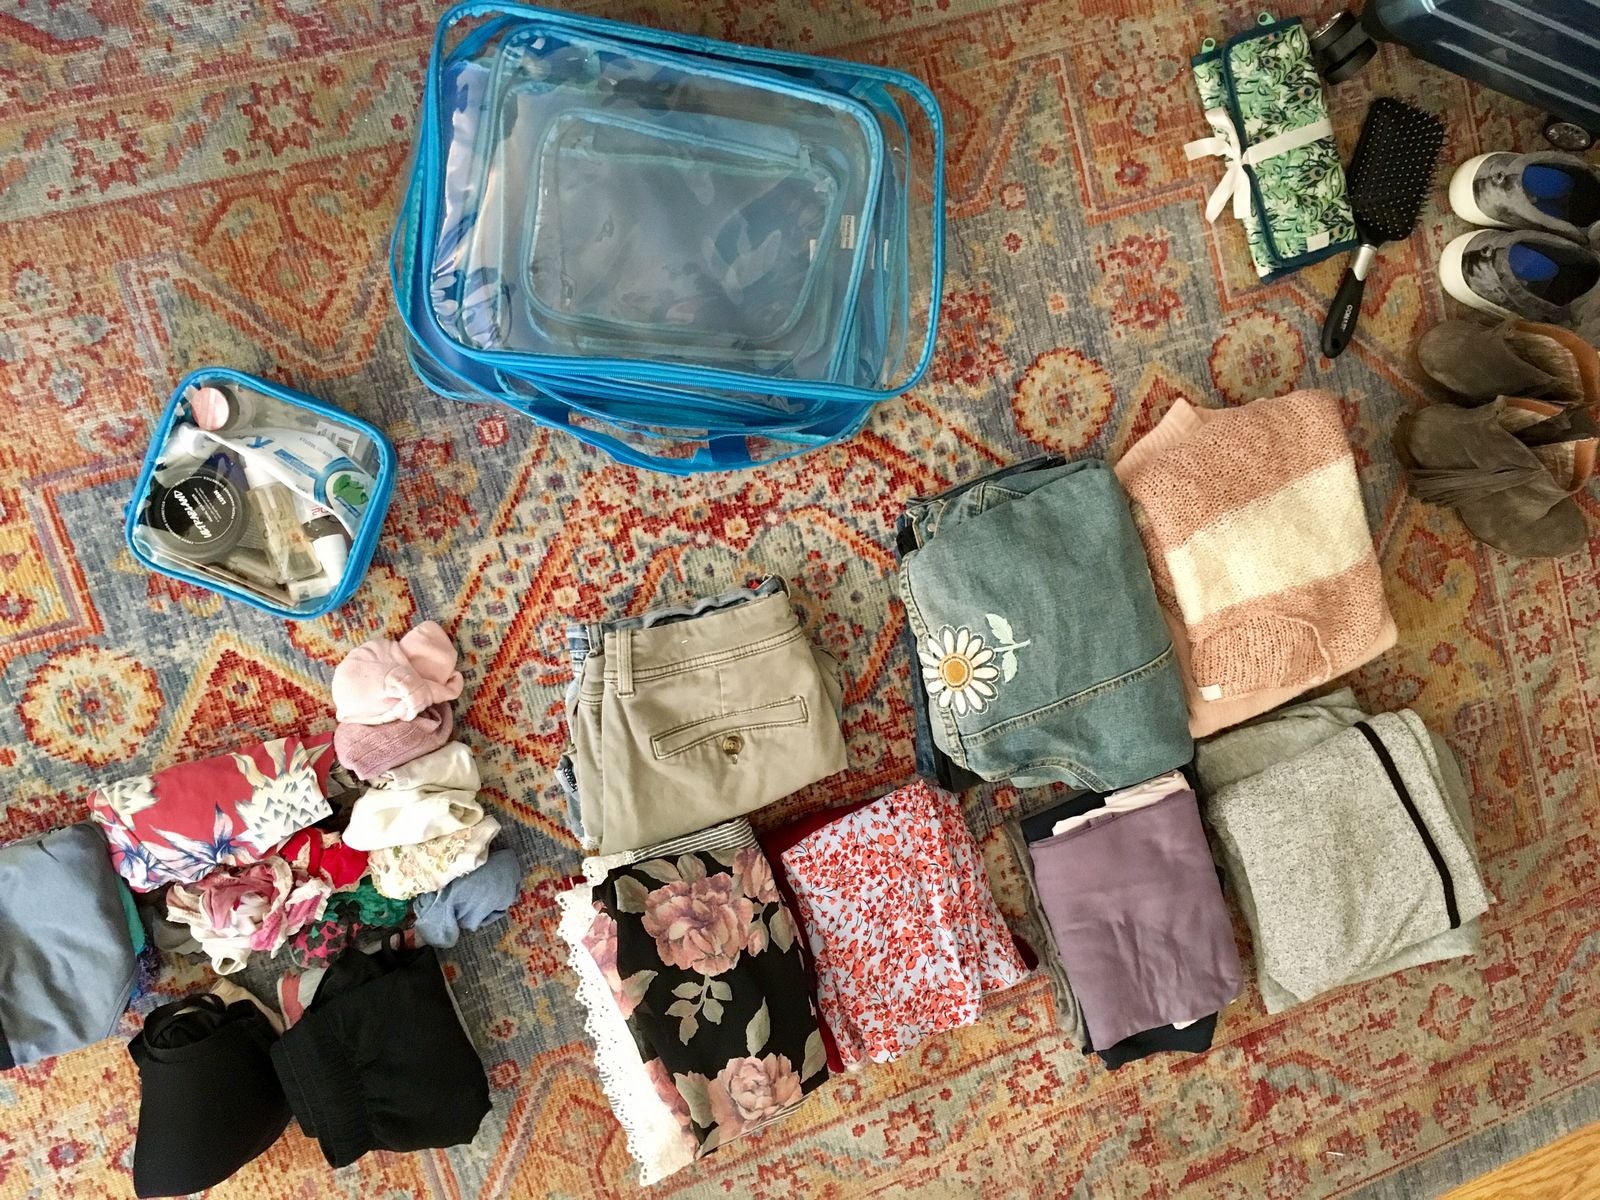 Organizing outfits in clear packing cubes